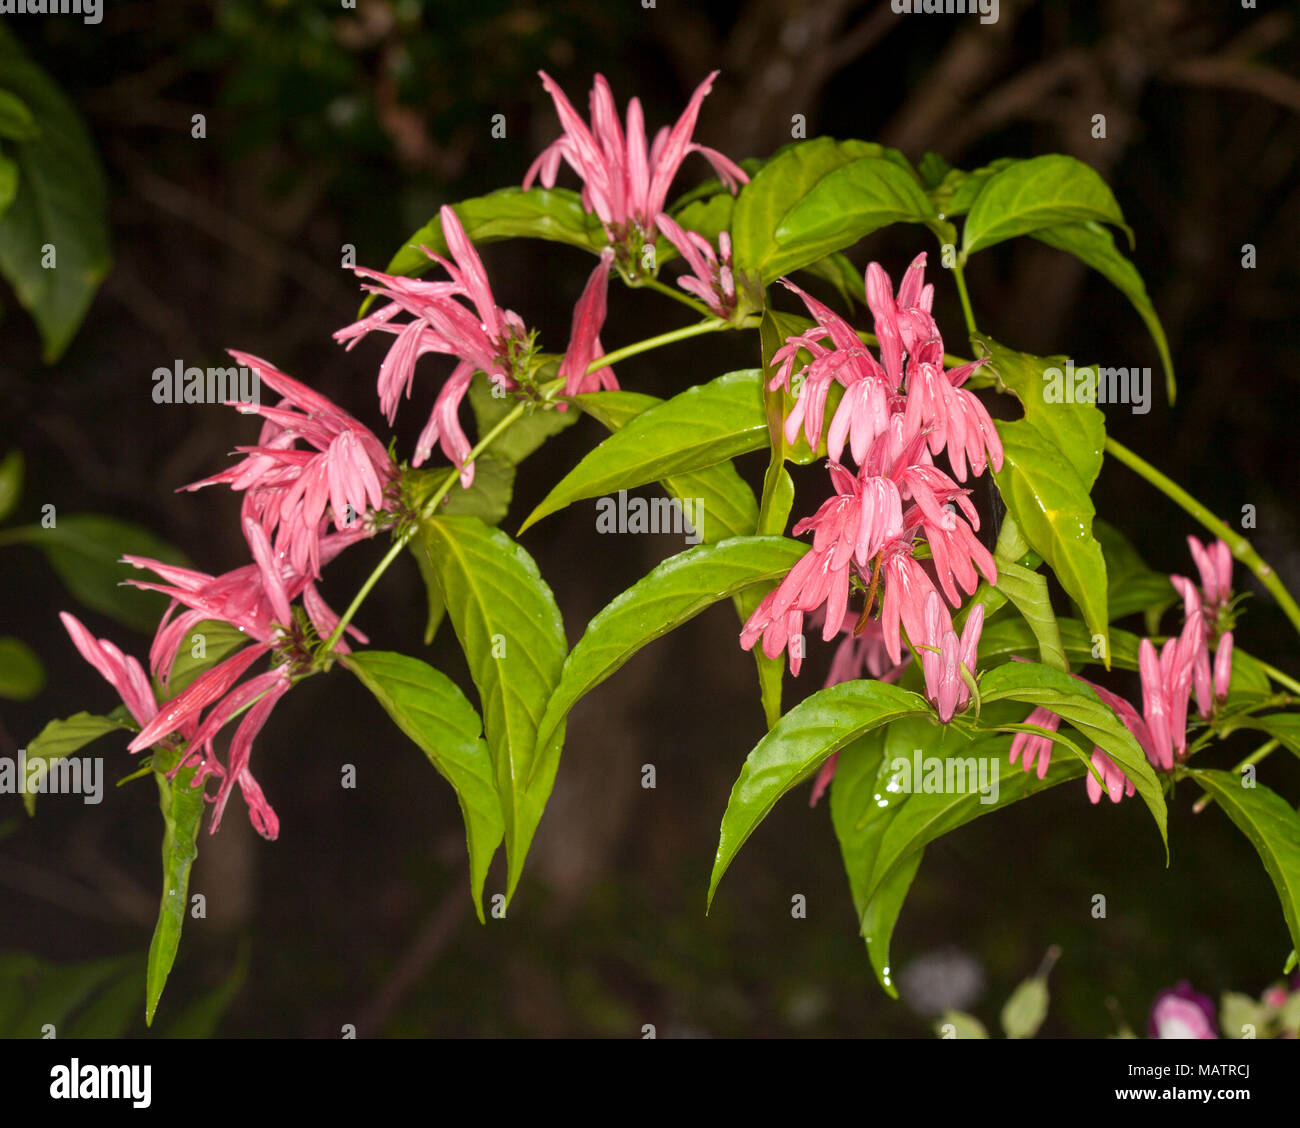 Unusual vivid pink flowers and bright green leaves of shrub Justicia nodosa 'Pretty In Pink' on dark background - in Australia Stock Photo